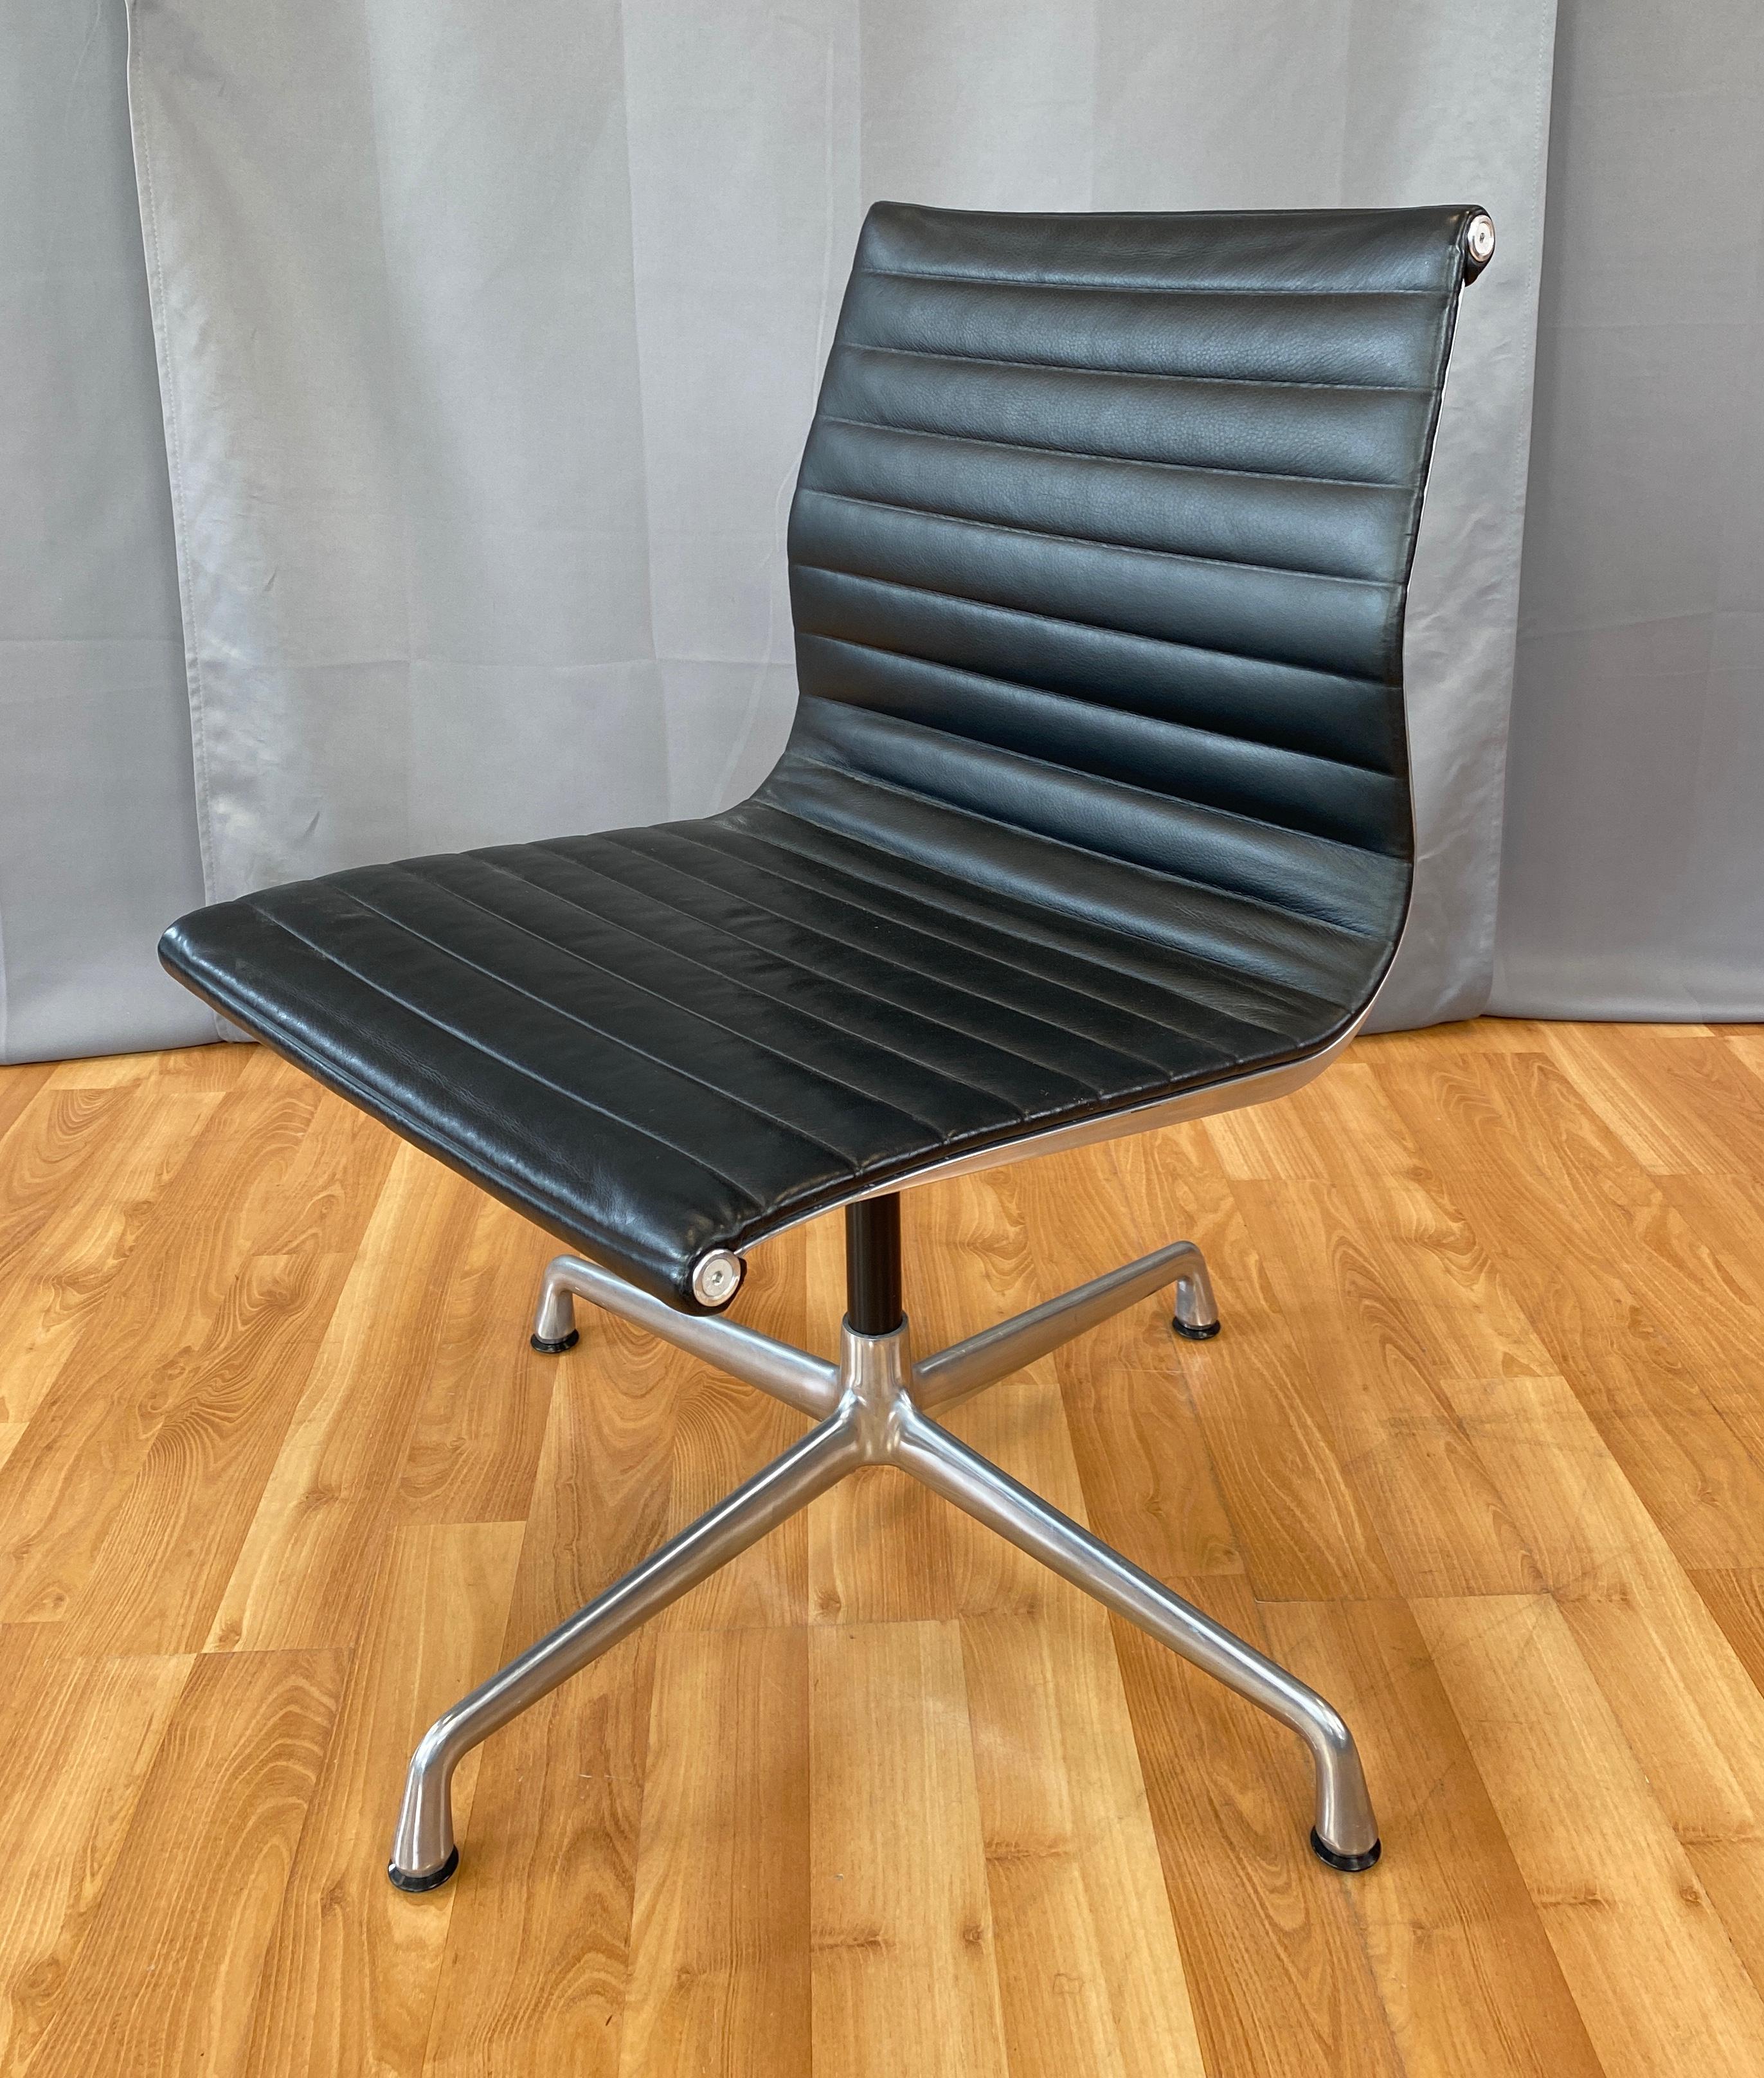 Offered here is a Eames aluminum group armless side chair. 
Has an Aluminum frame and Black leather upholstery. 
First designed in 1958, this one is circa 2000's.